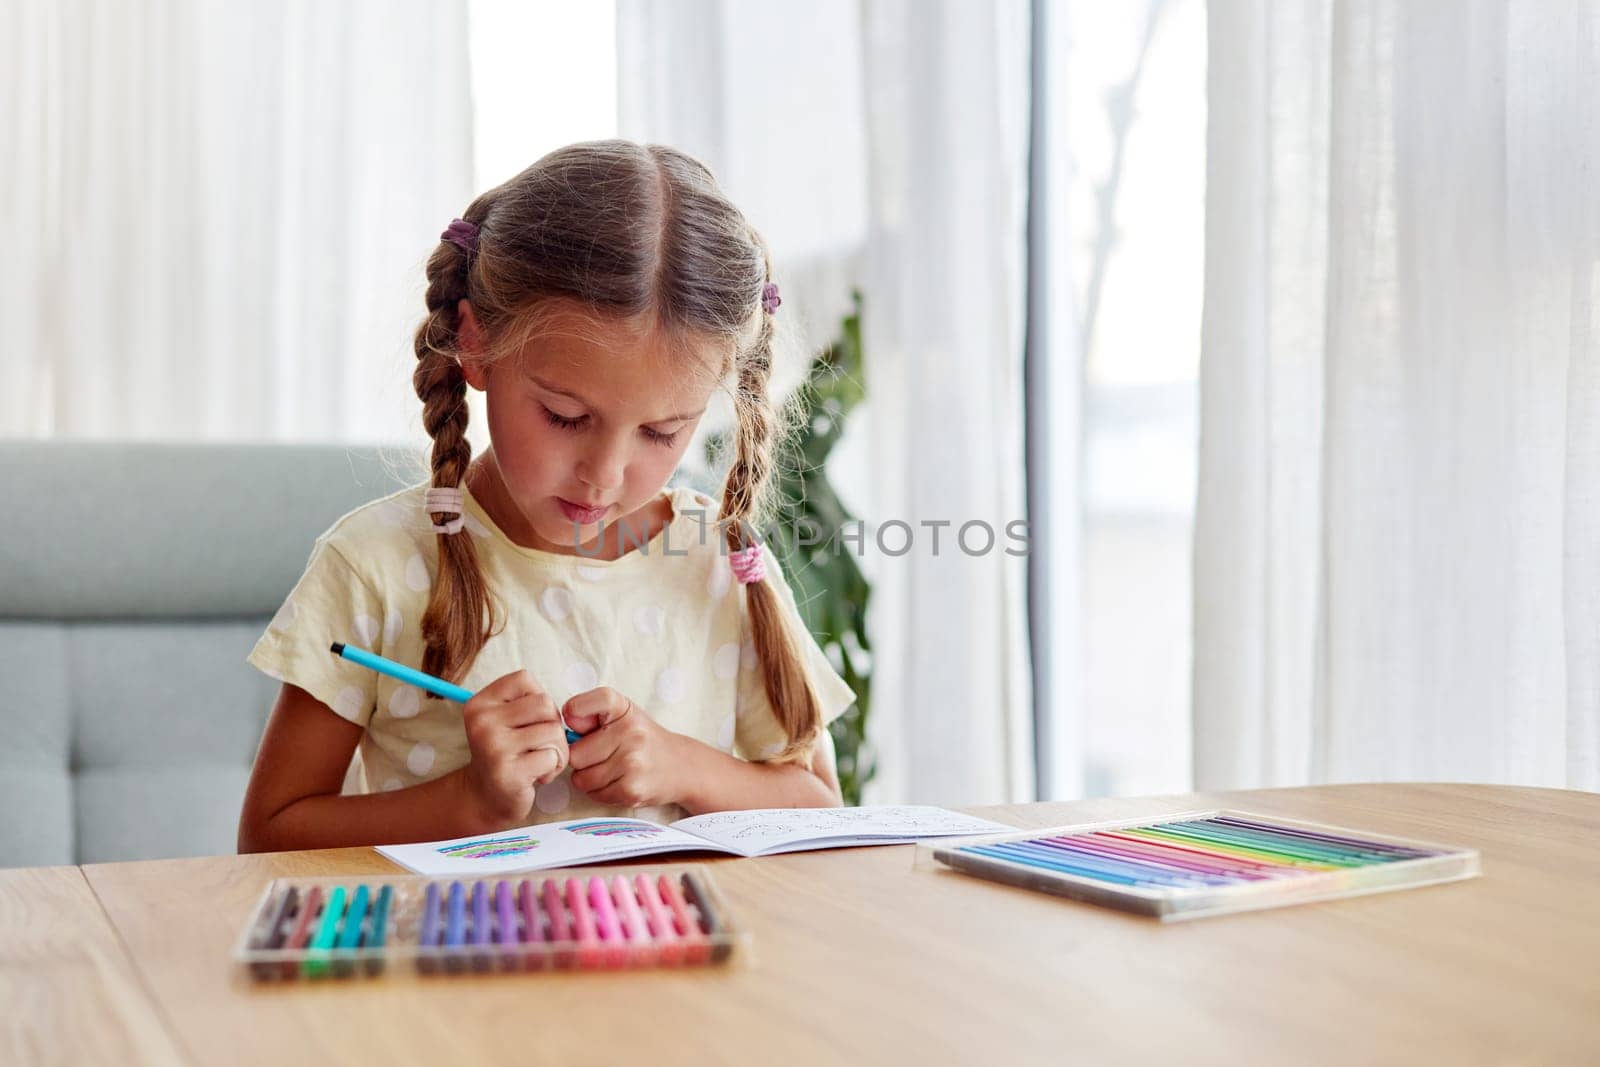 Girl with braids chooses bright felt-tip pen to draw picture by Demkat